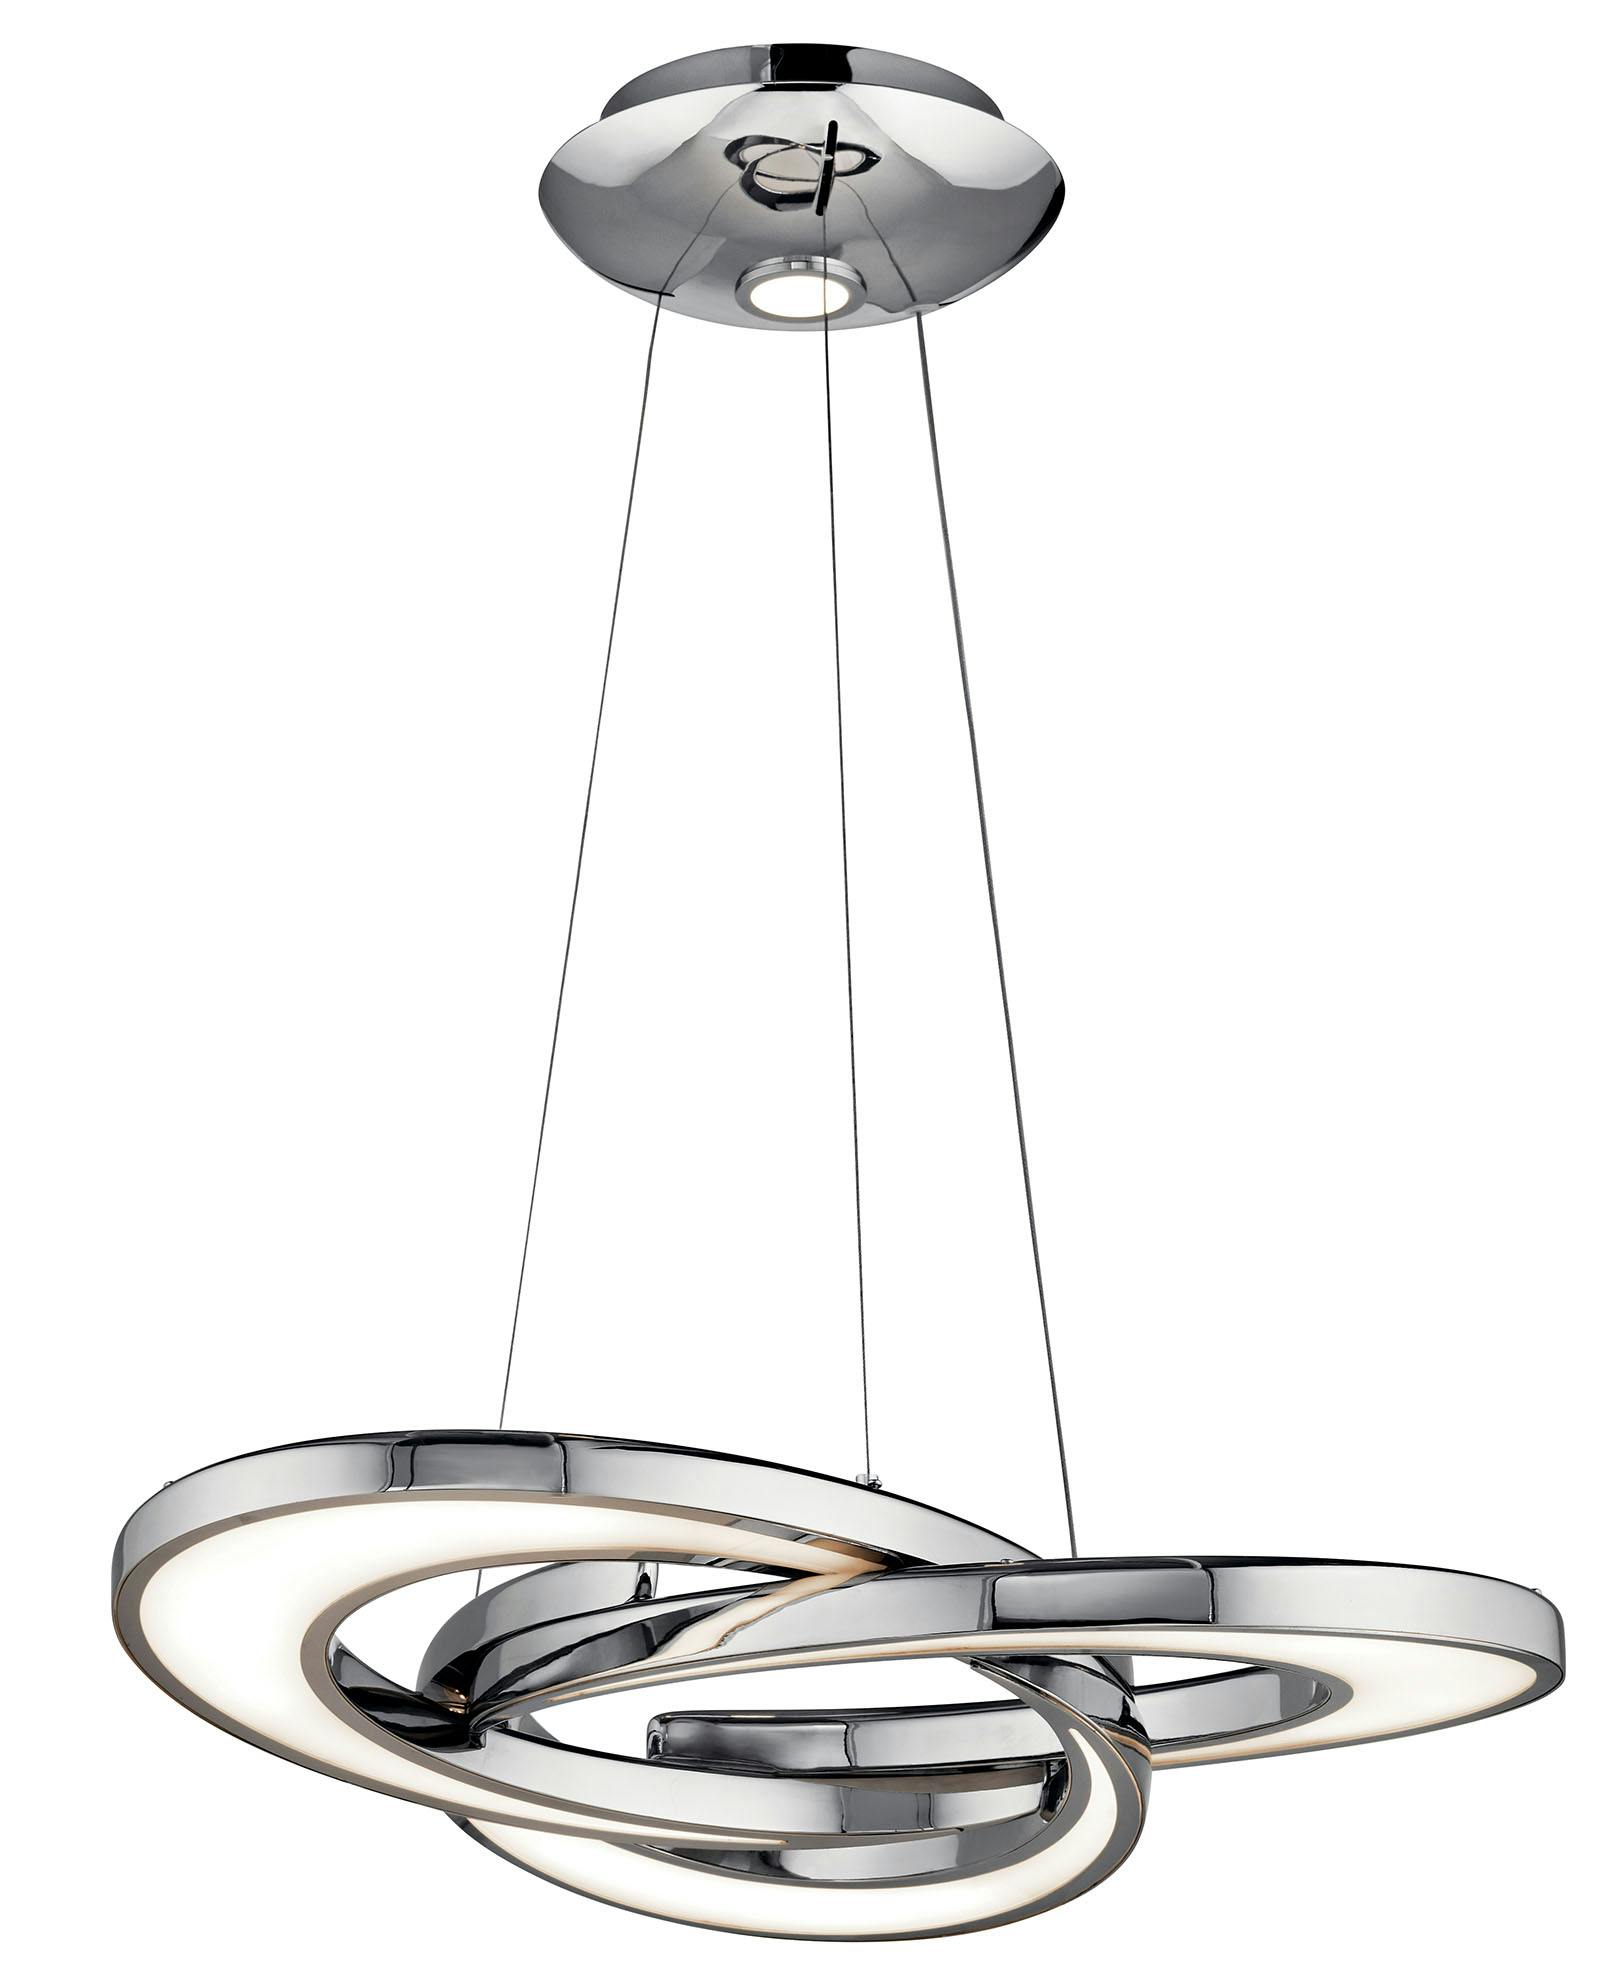 Destiny LED Chandelier in a Chrome finish on a white background